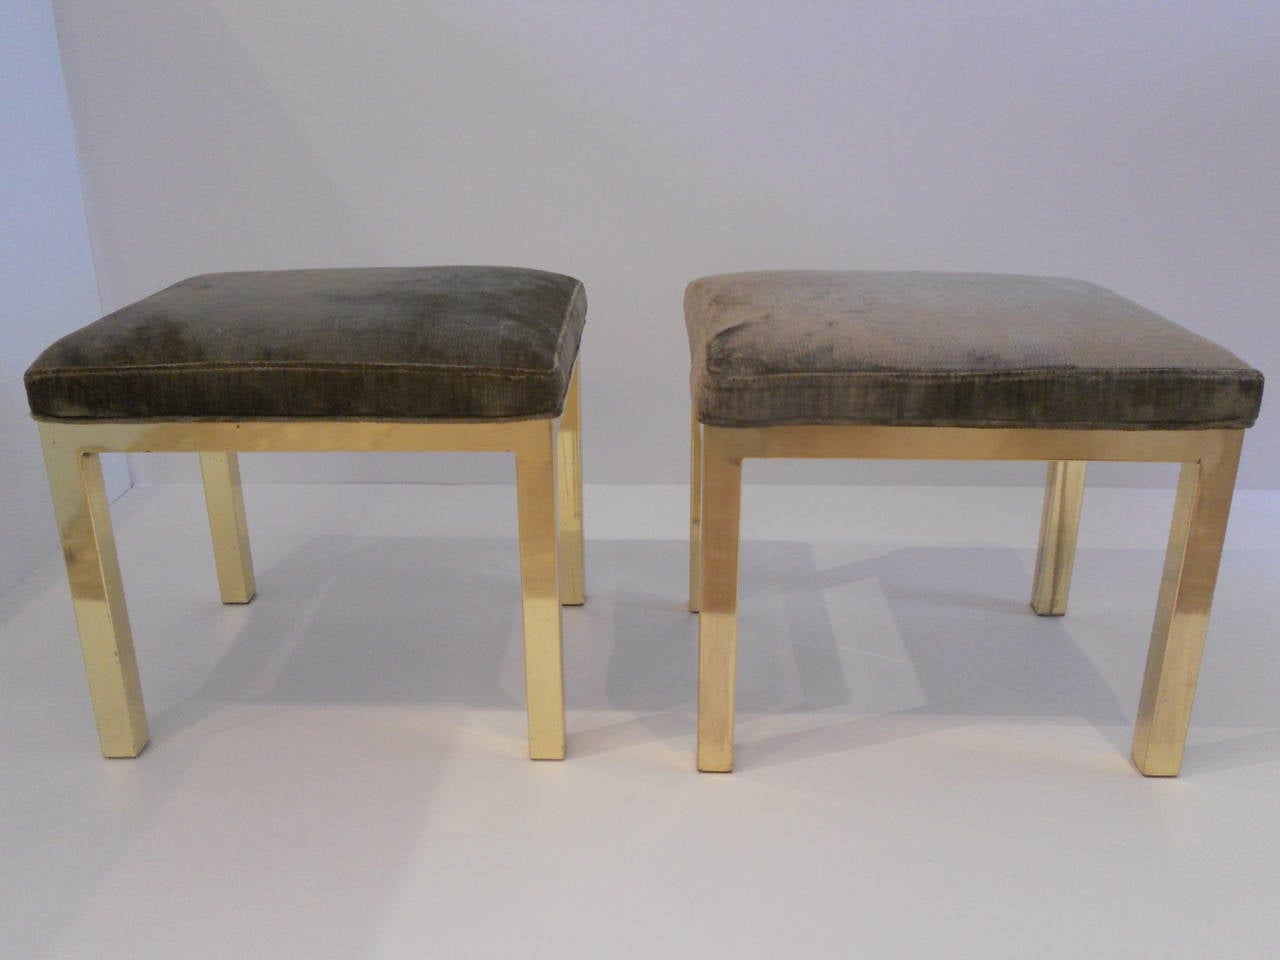 Vintage pair of brass stools or ottomans with newly upholstered seats in a gray linen velvet.